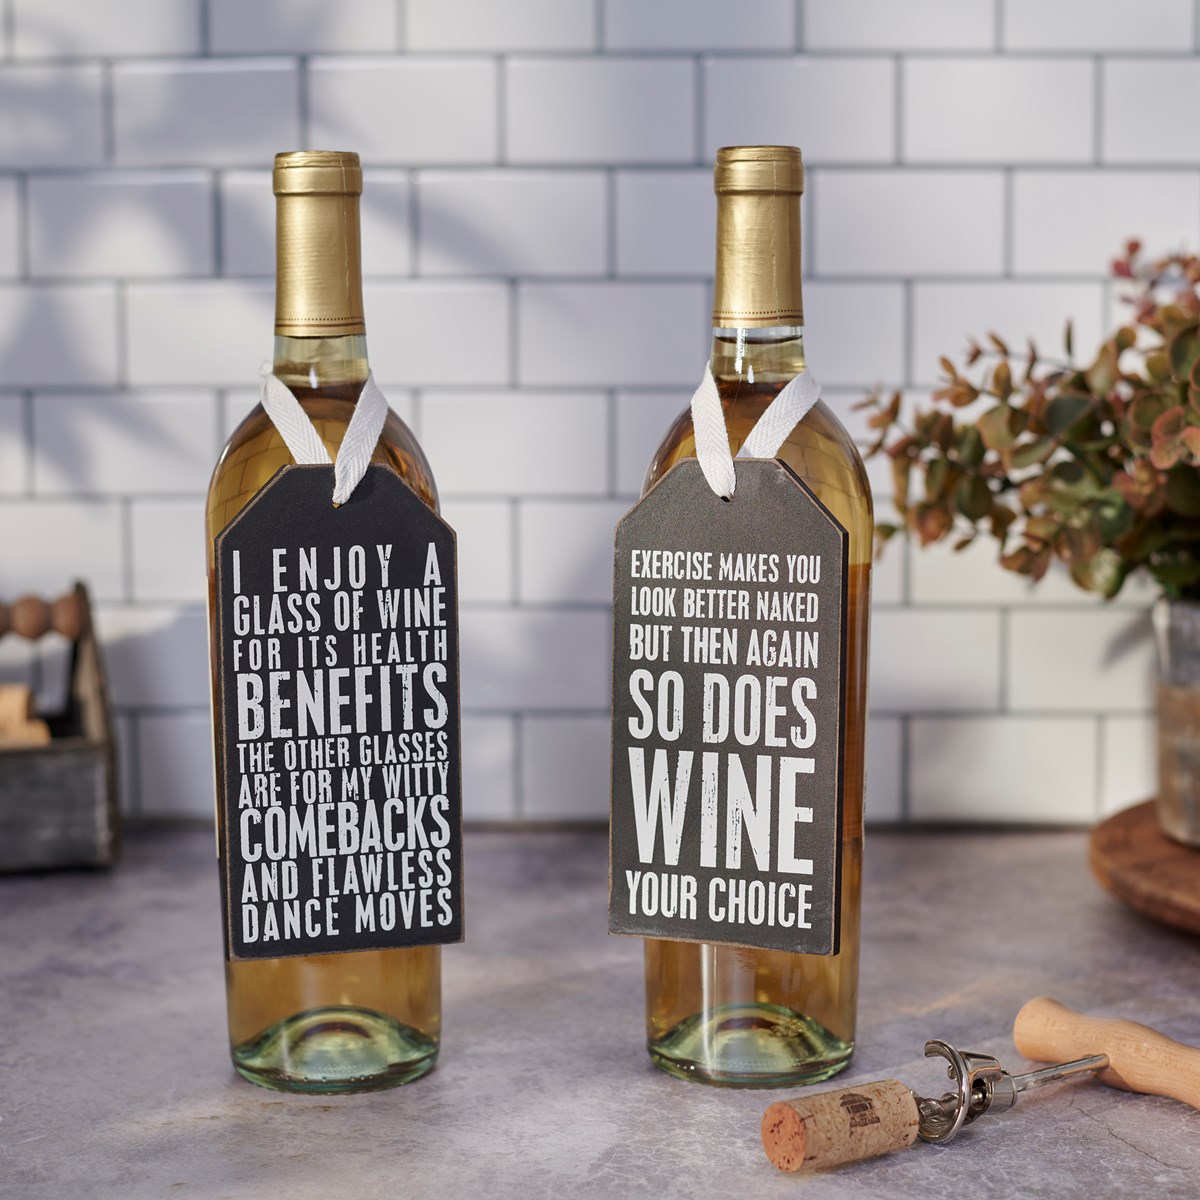 So Does Wine Bottle Tag - Wood, Cotton